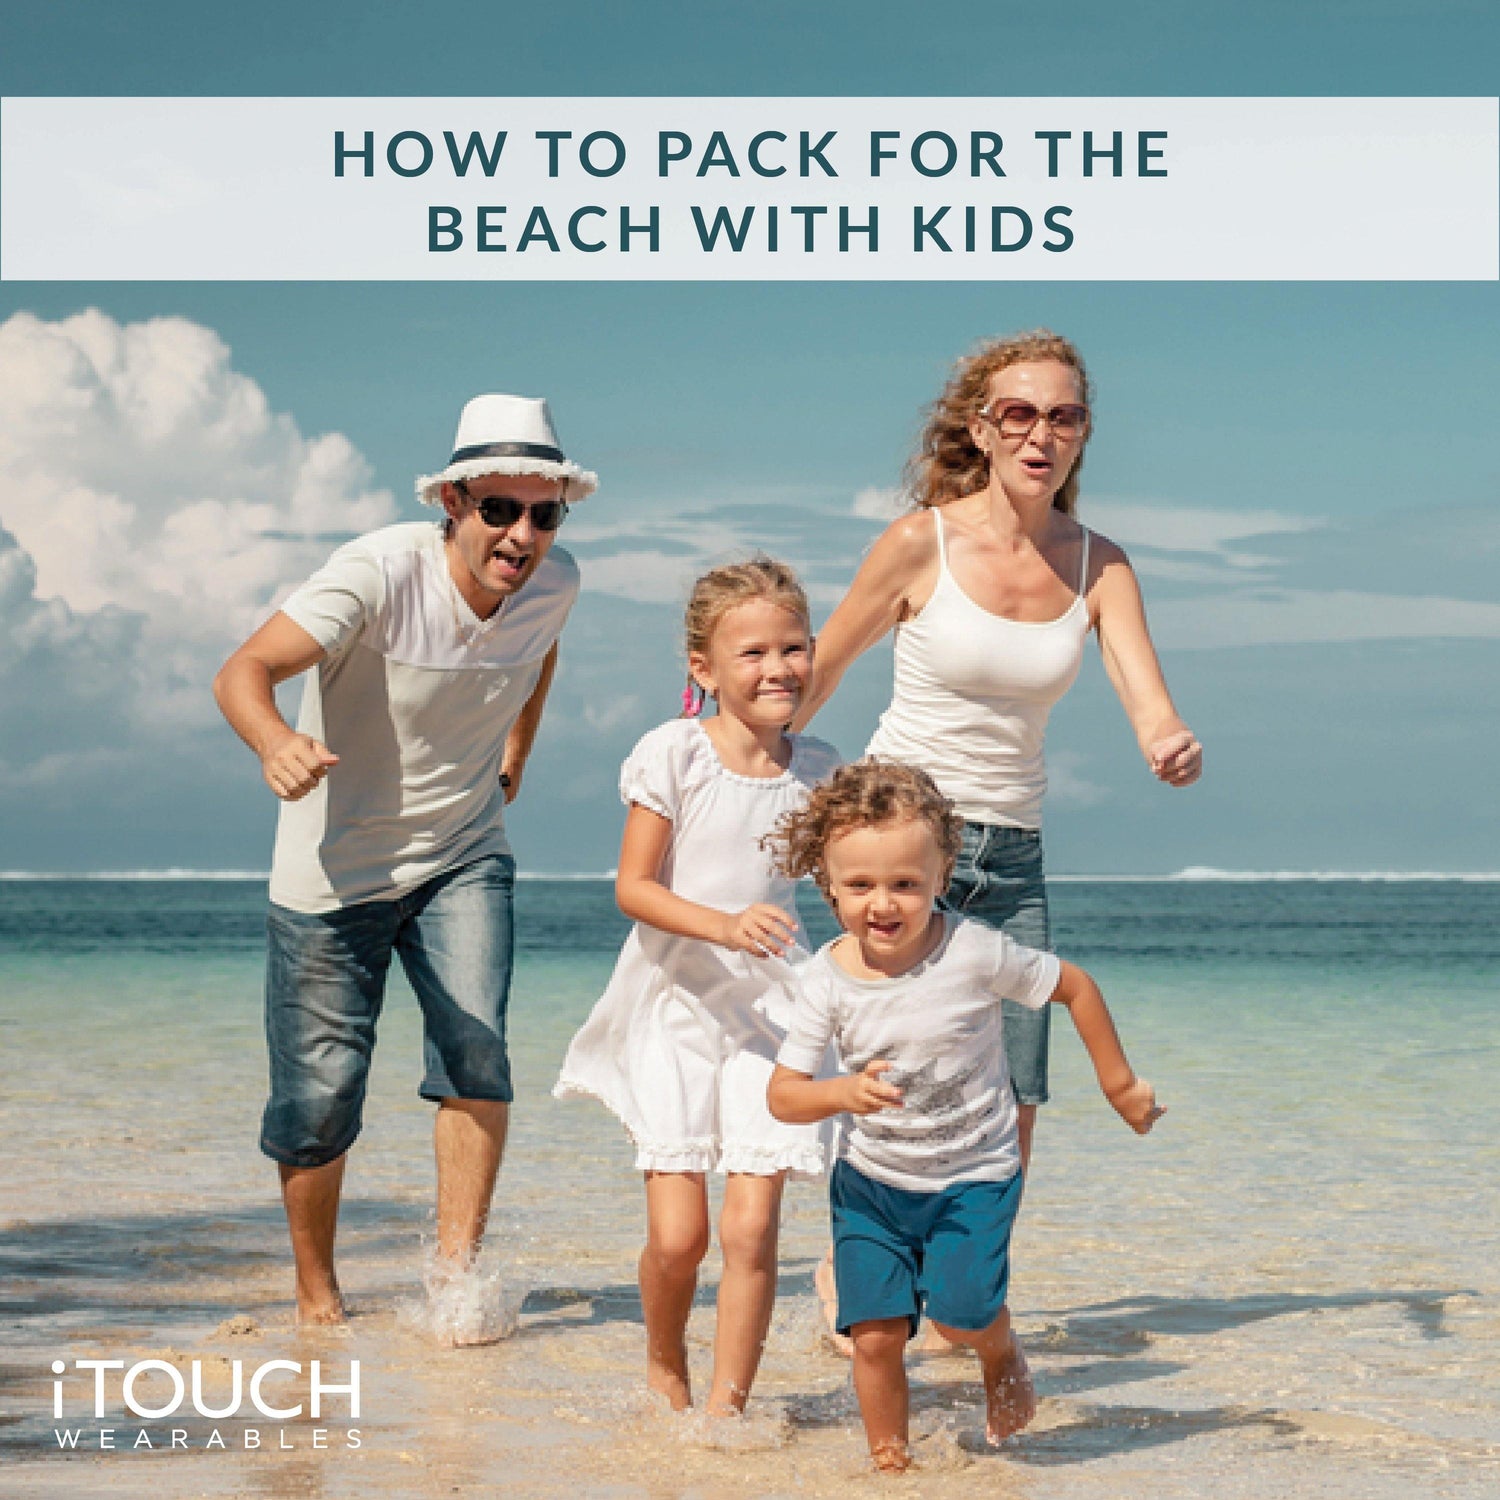 How To Pack For The Beach With Kids - iTOUCH Wearables